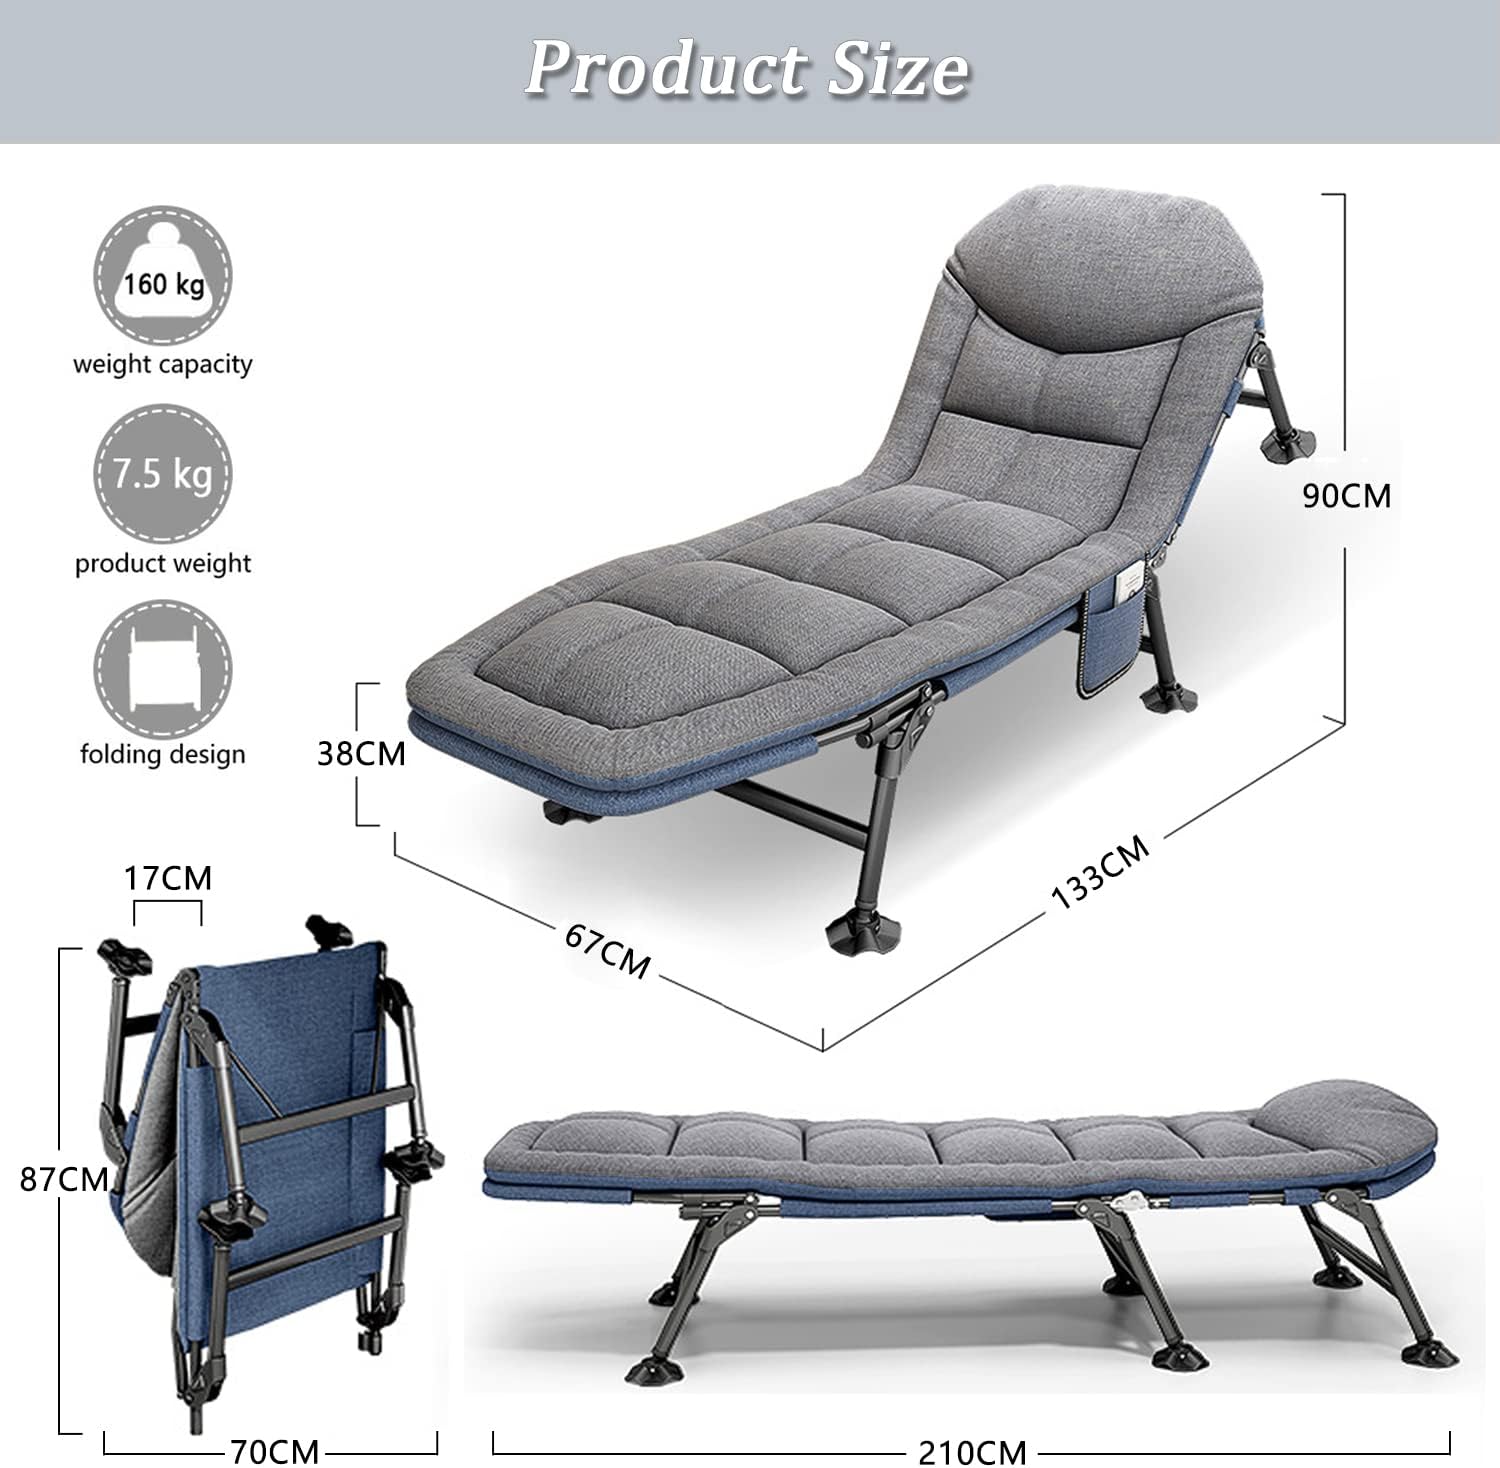 Portable Outdoor Bedchair with Side Pocket